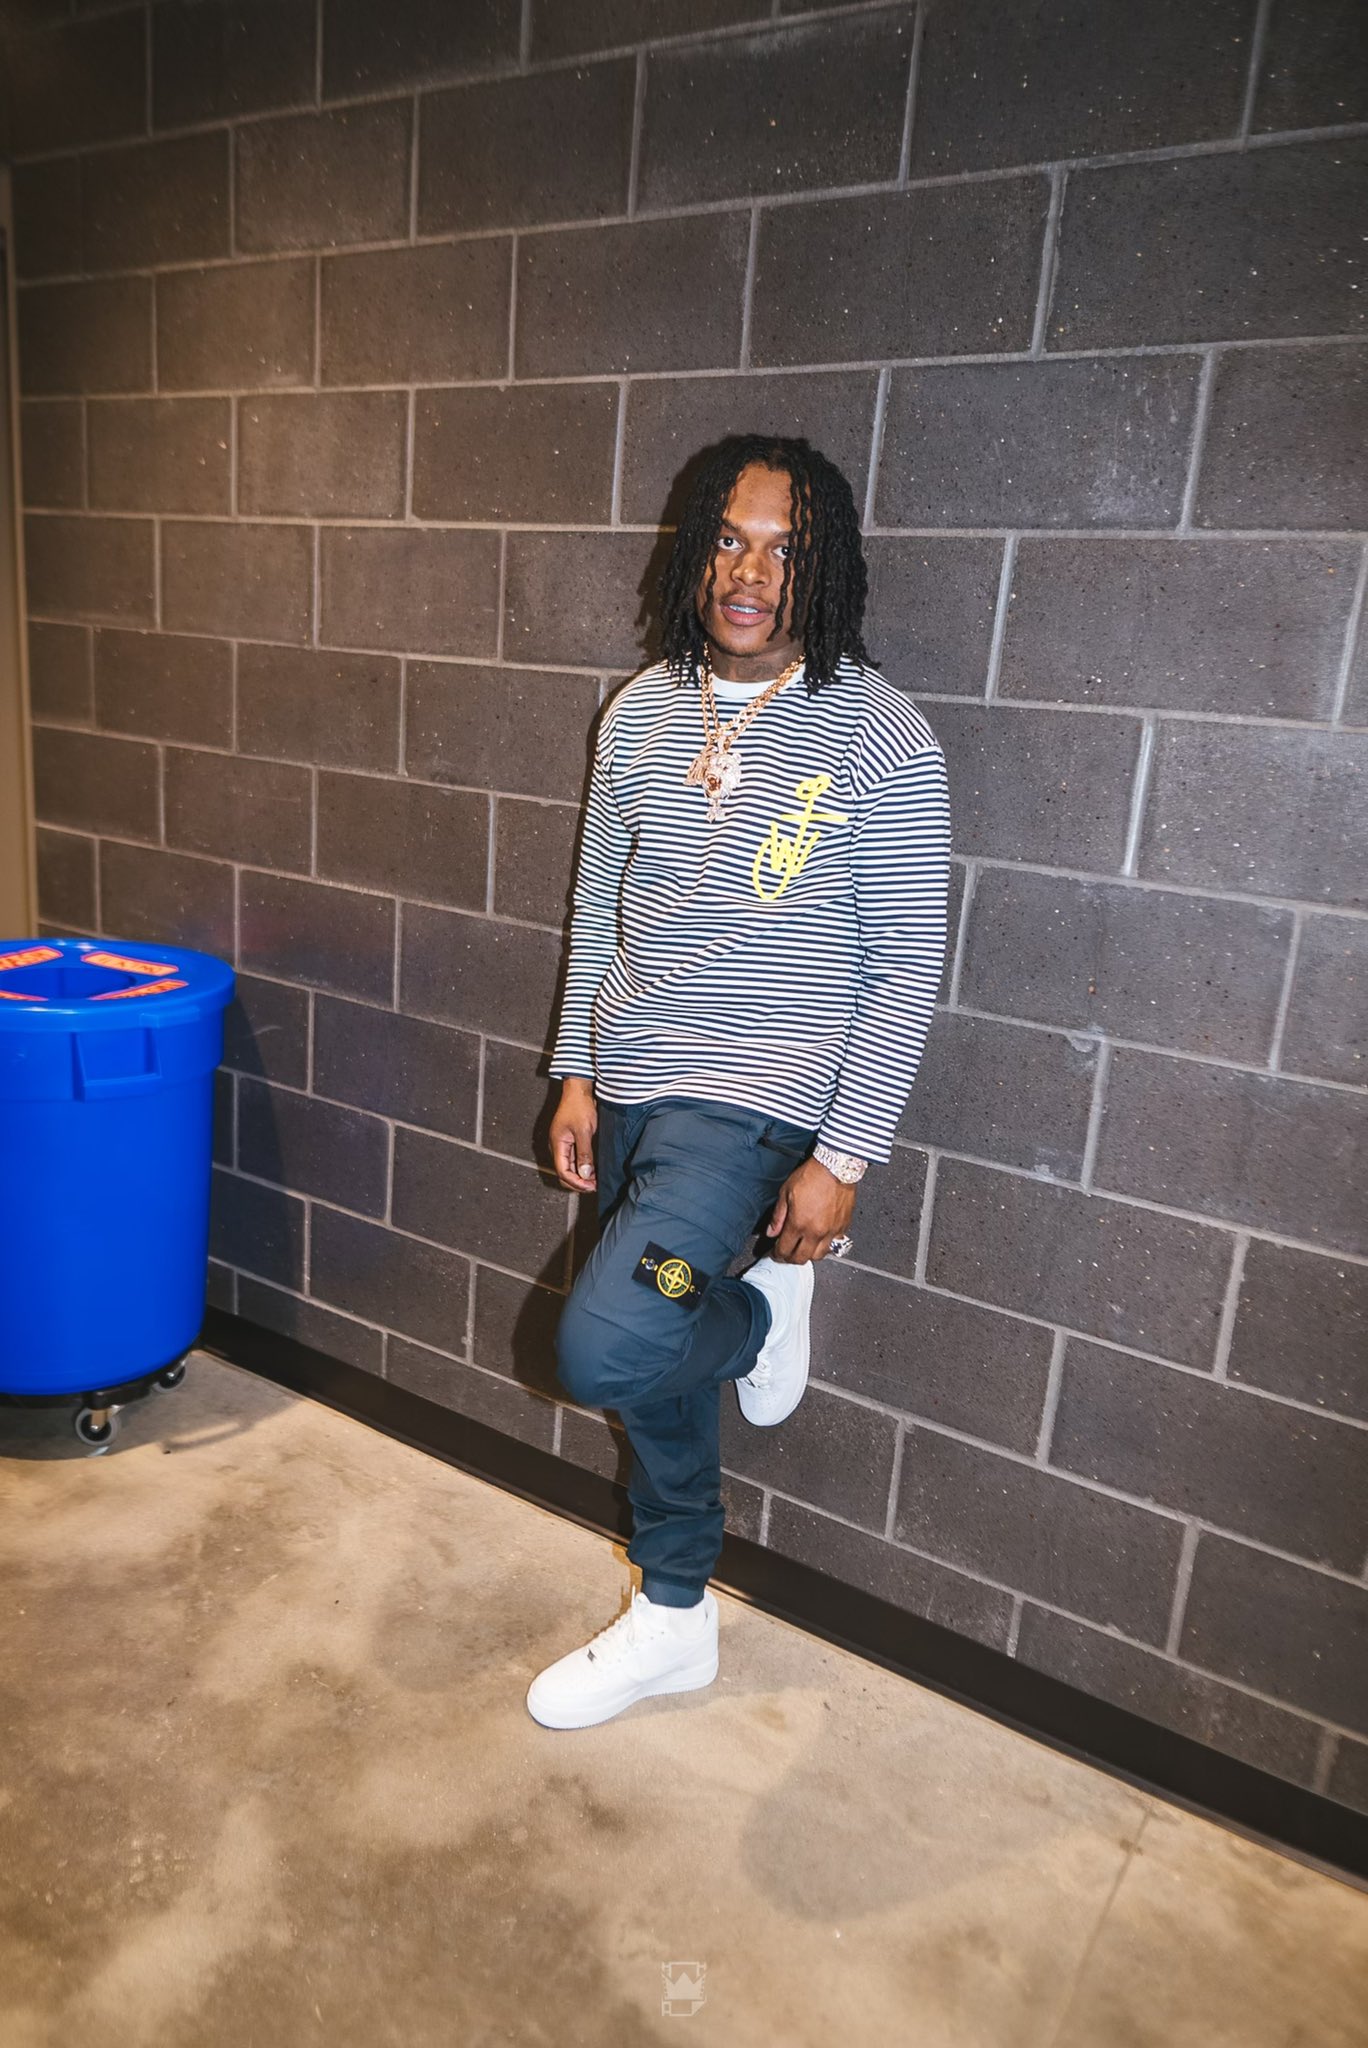 BOOKA on X: I'm ebk I don't mind getting into it with no mf https